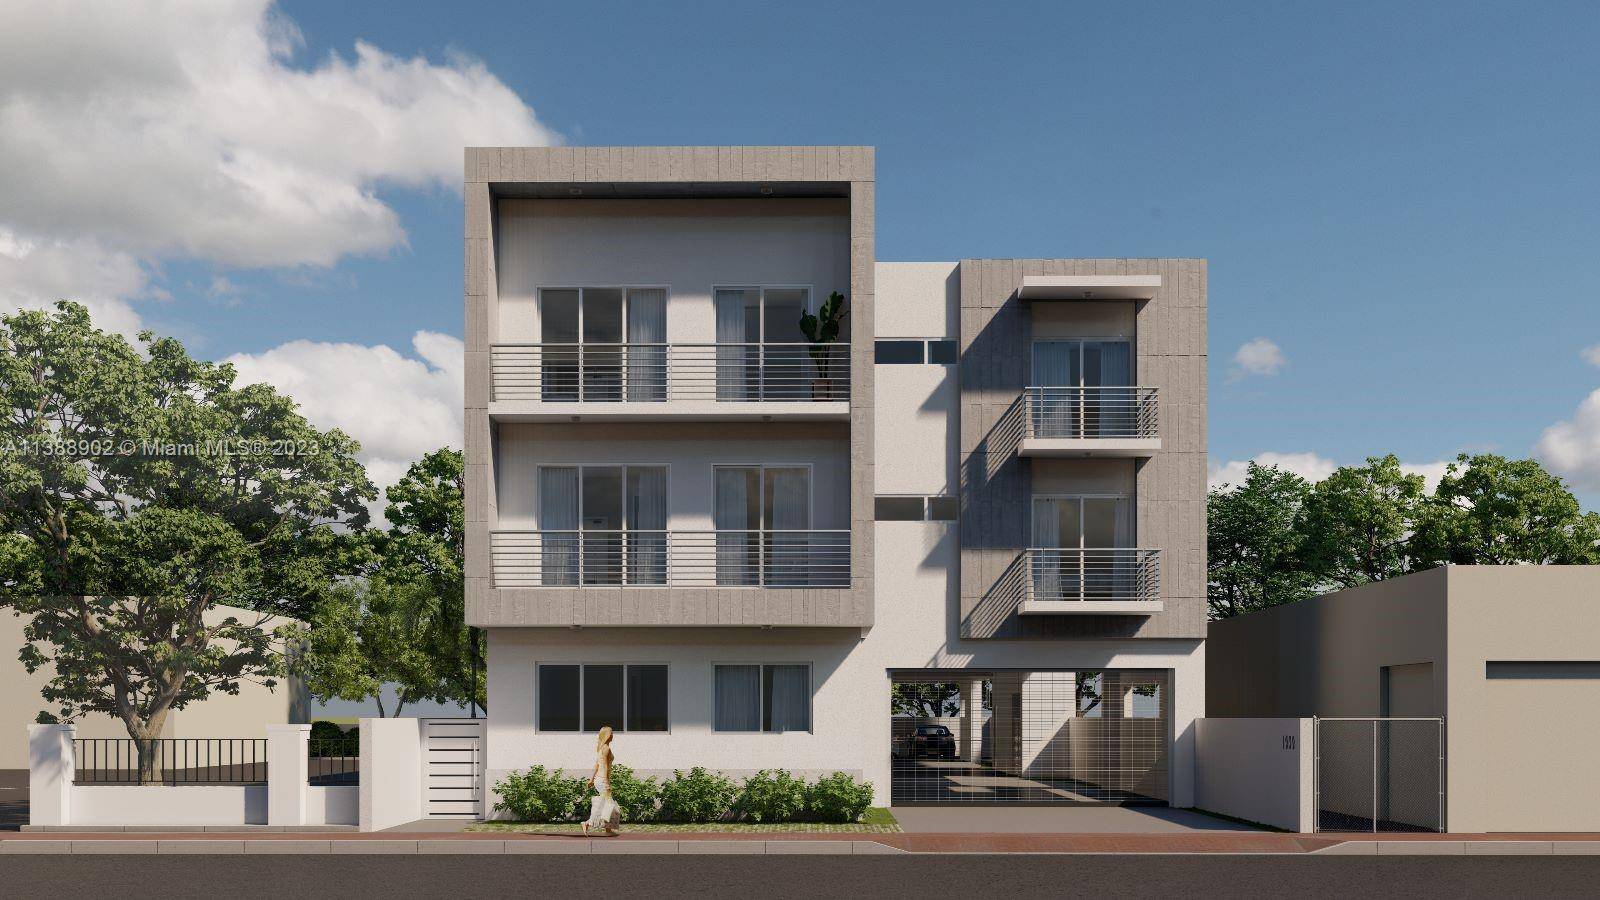 Exceptional opportunity to acquire a prime multifamily lot of 7, 500 SF ideally situated in E Little Havana area zoned T5 Open, allowing for a variety of residential and mixed ...